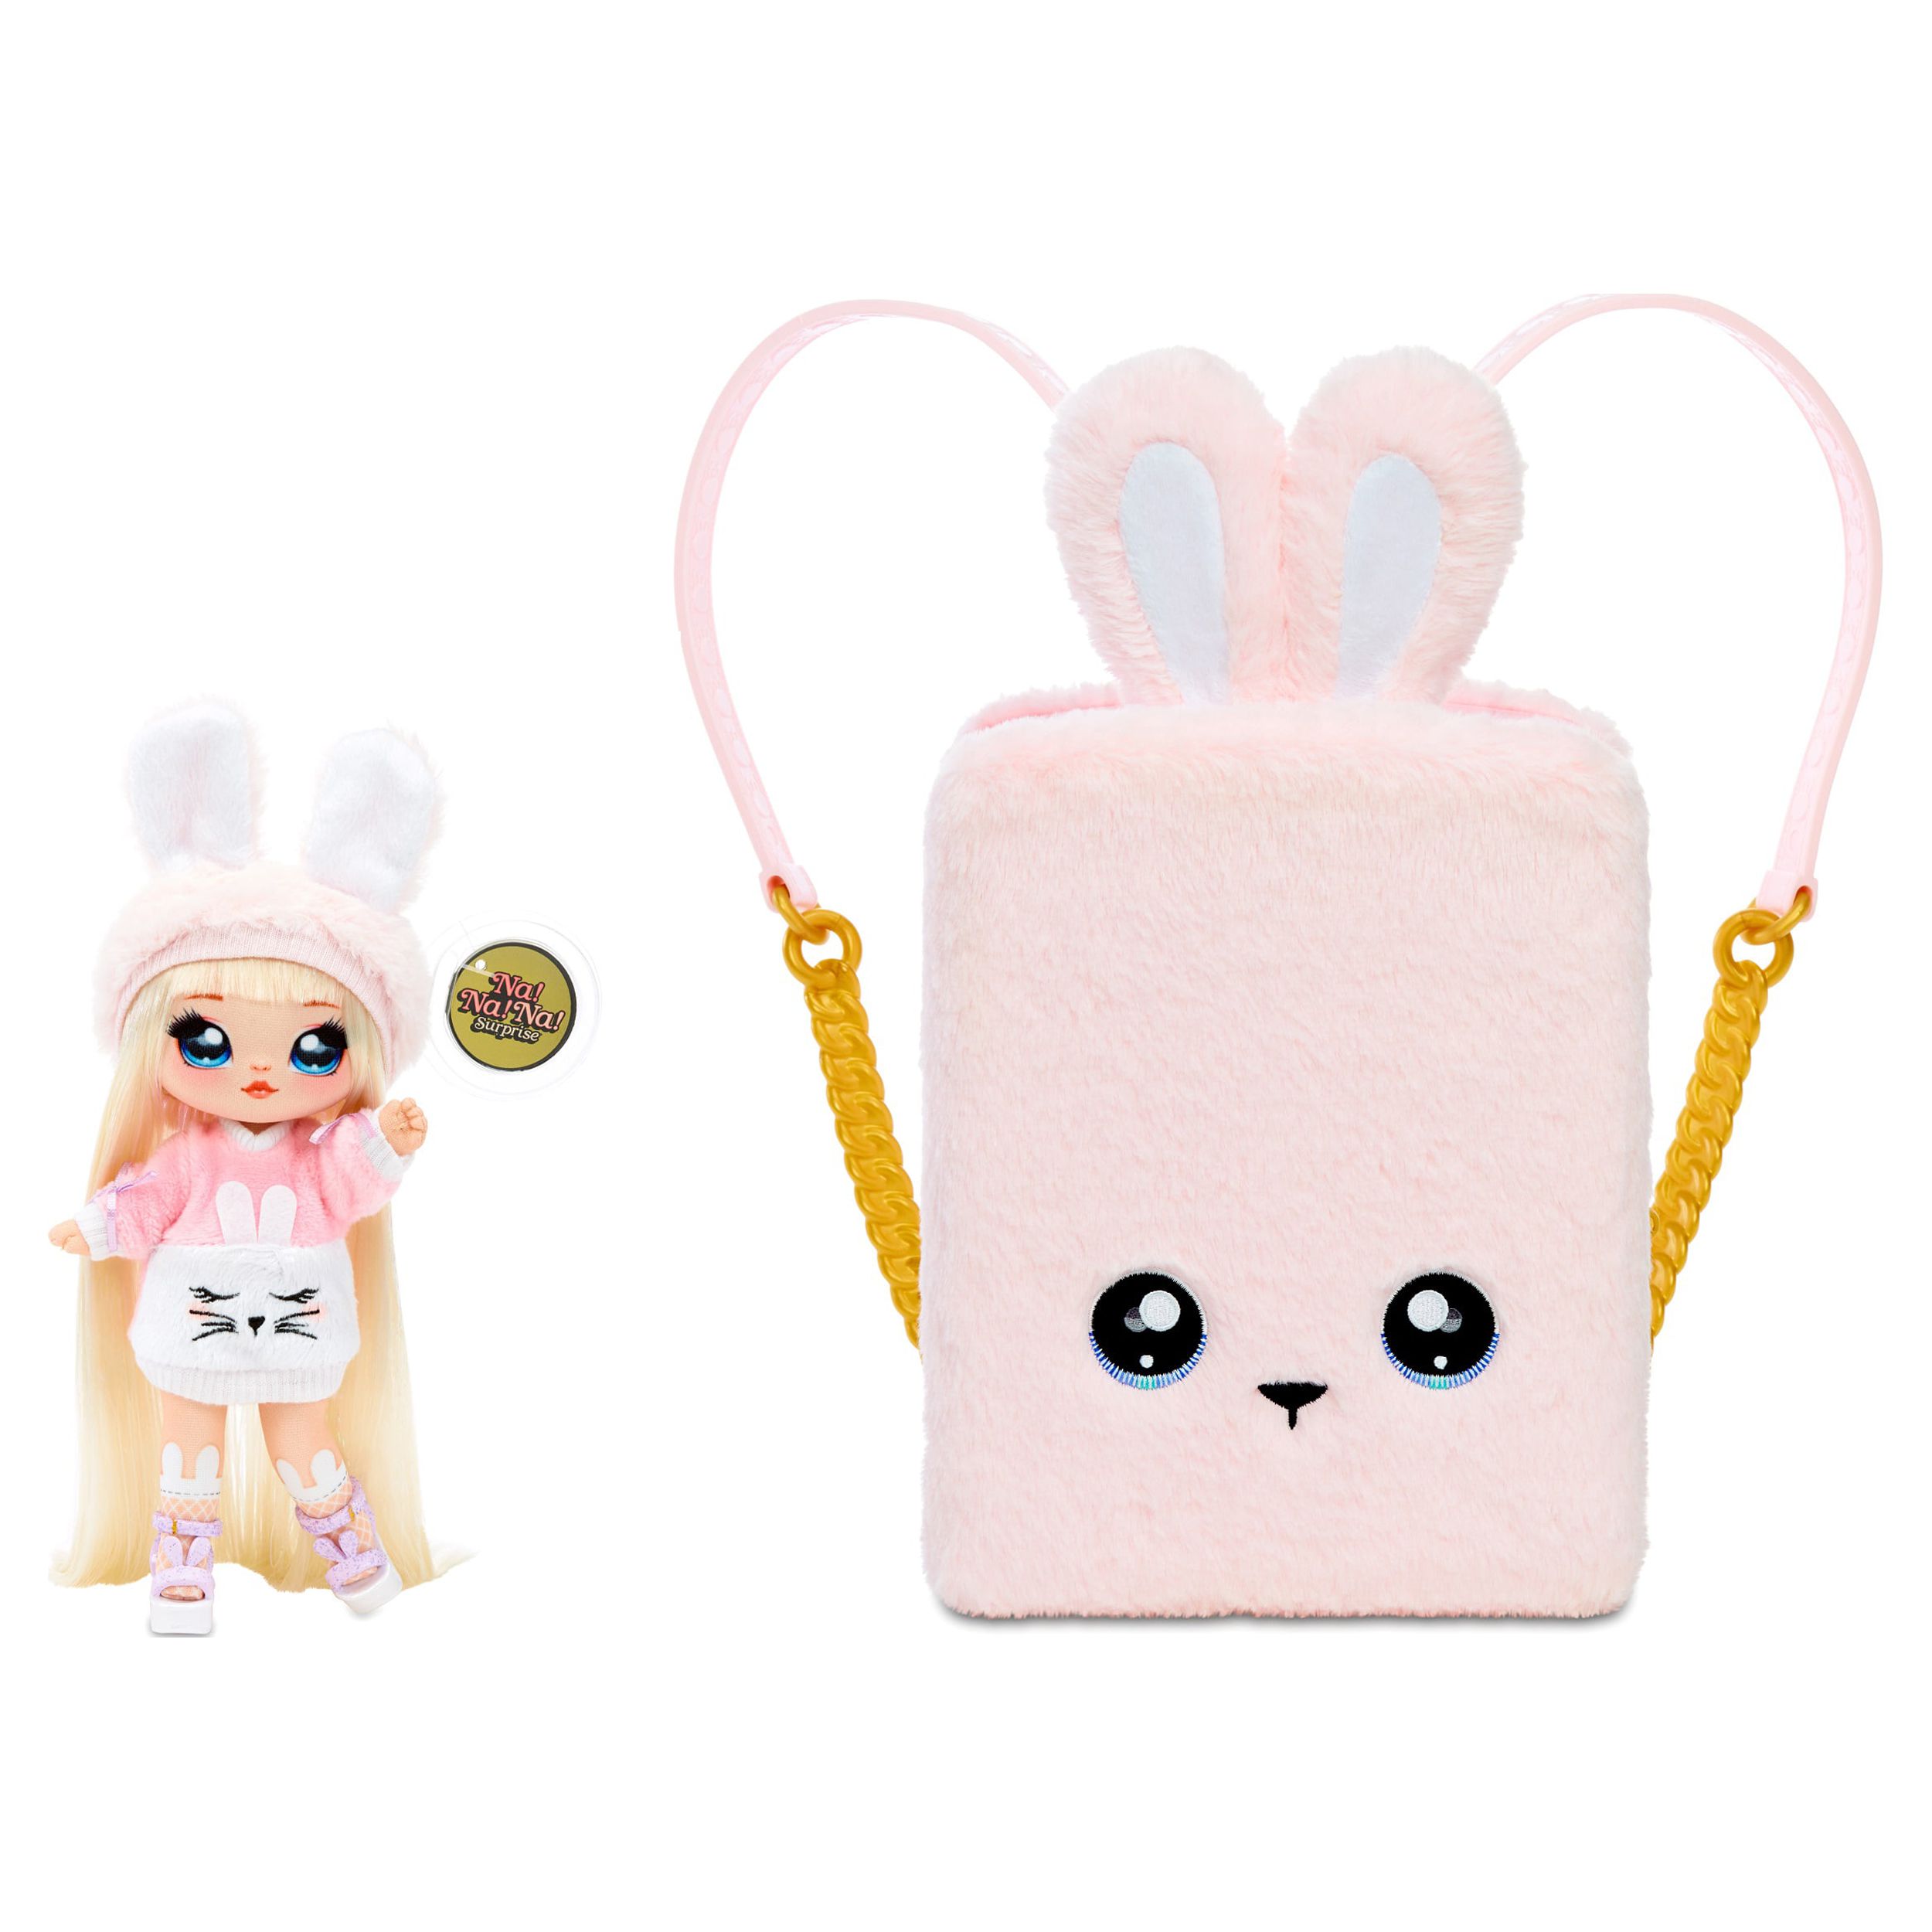 Na! Na! Na! Surprise 3-in-1 Backpack Bedroom Pink Bunny Playset with Limited Edition Doll Playset - image 3 of 5